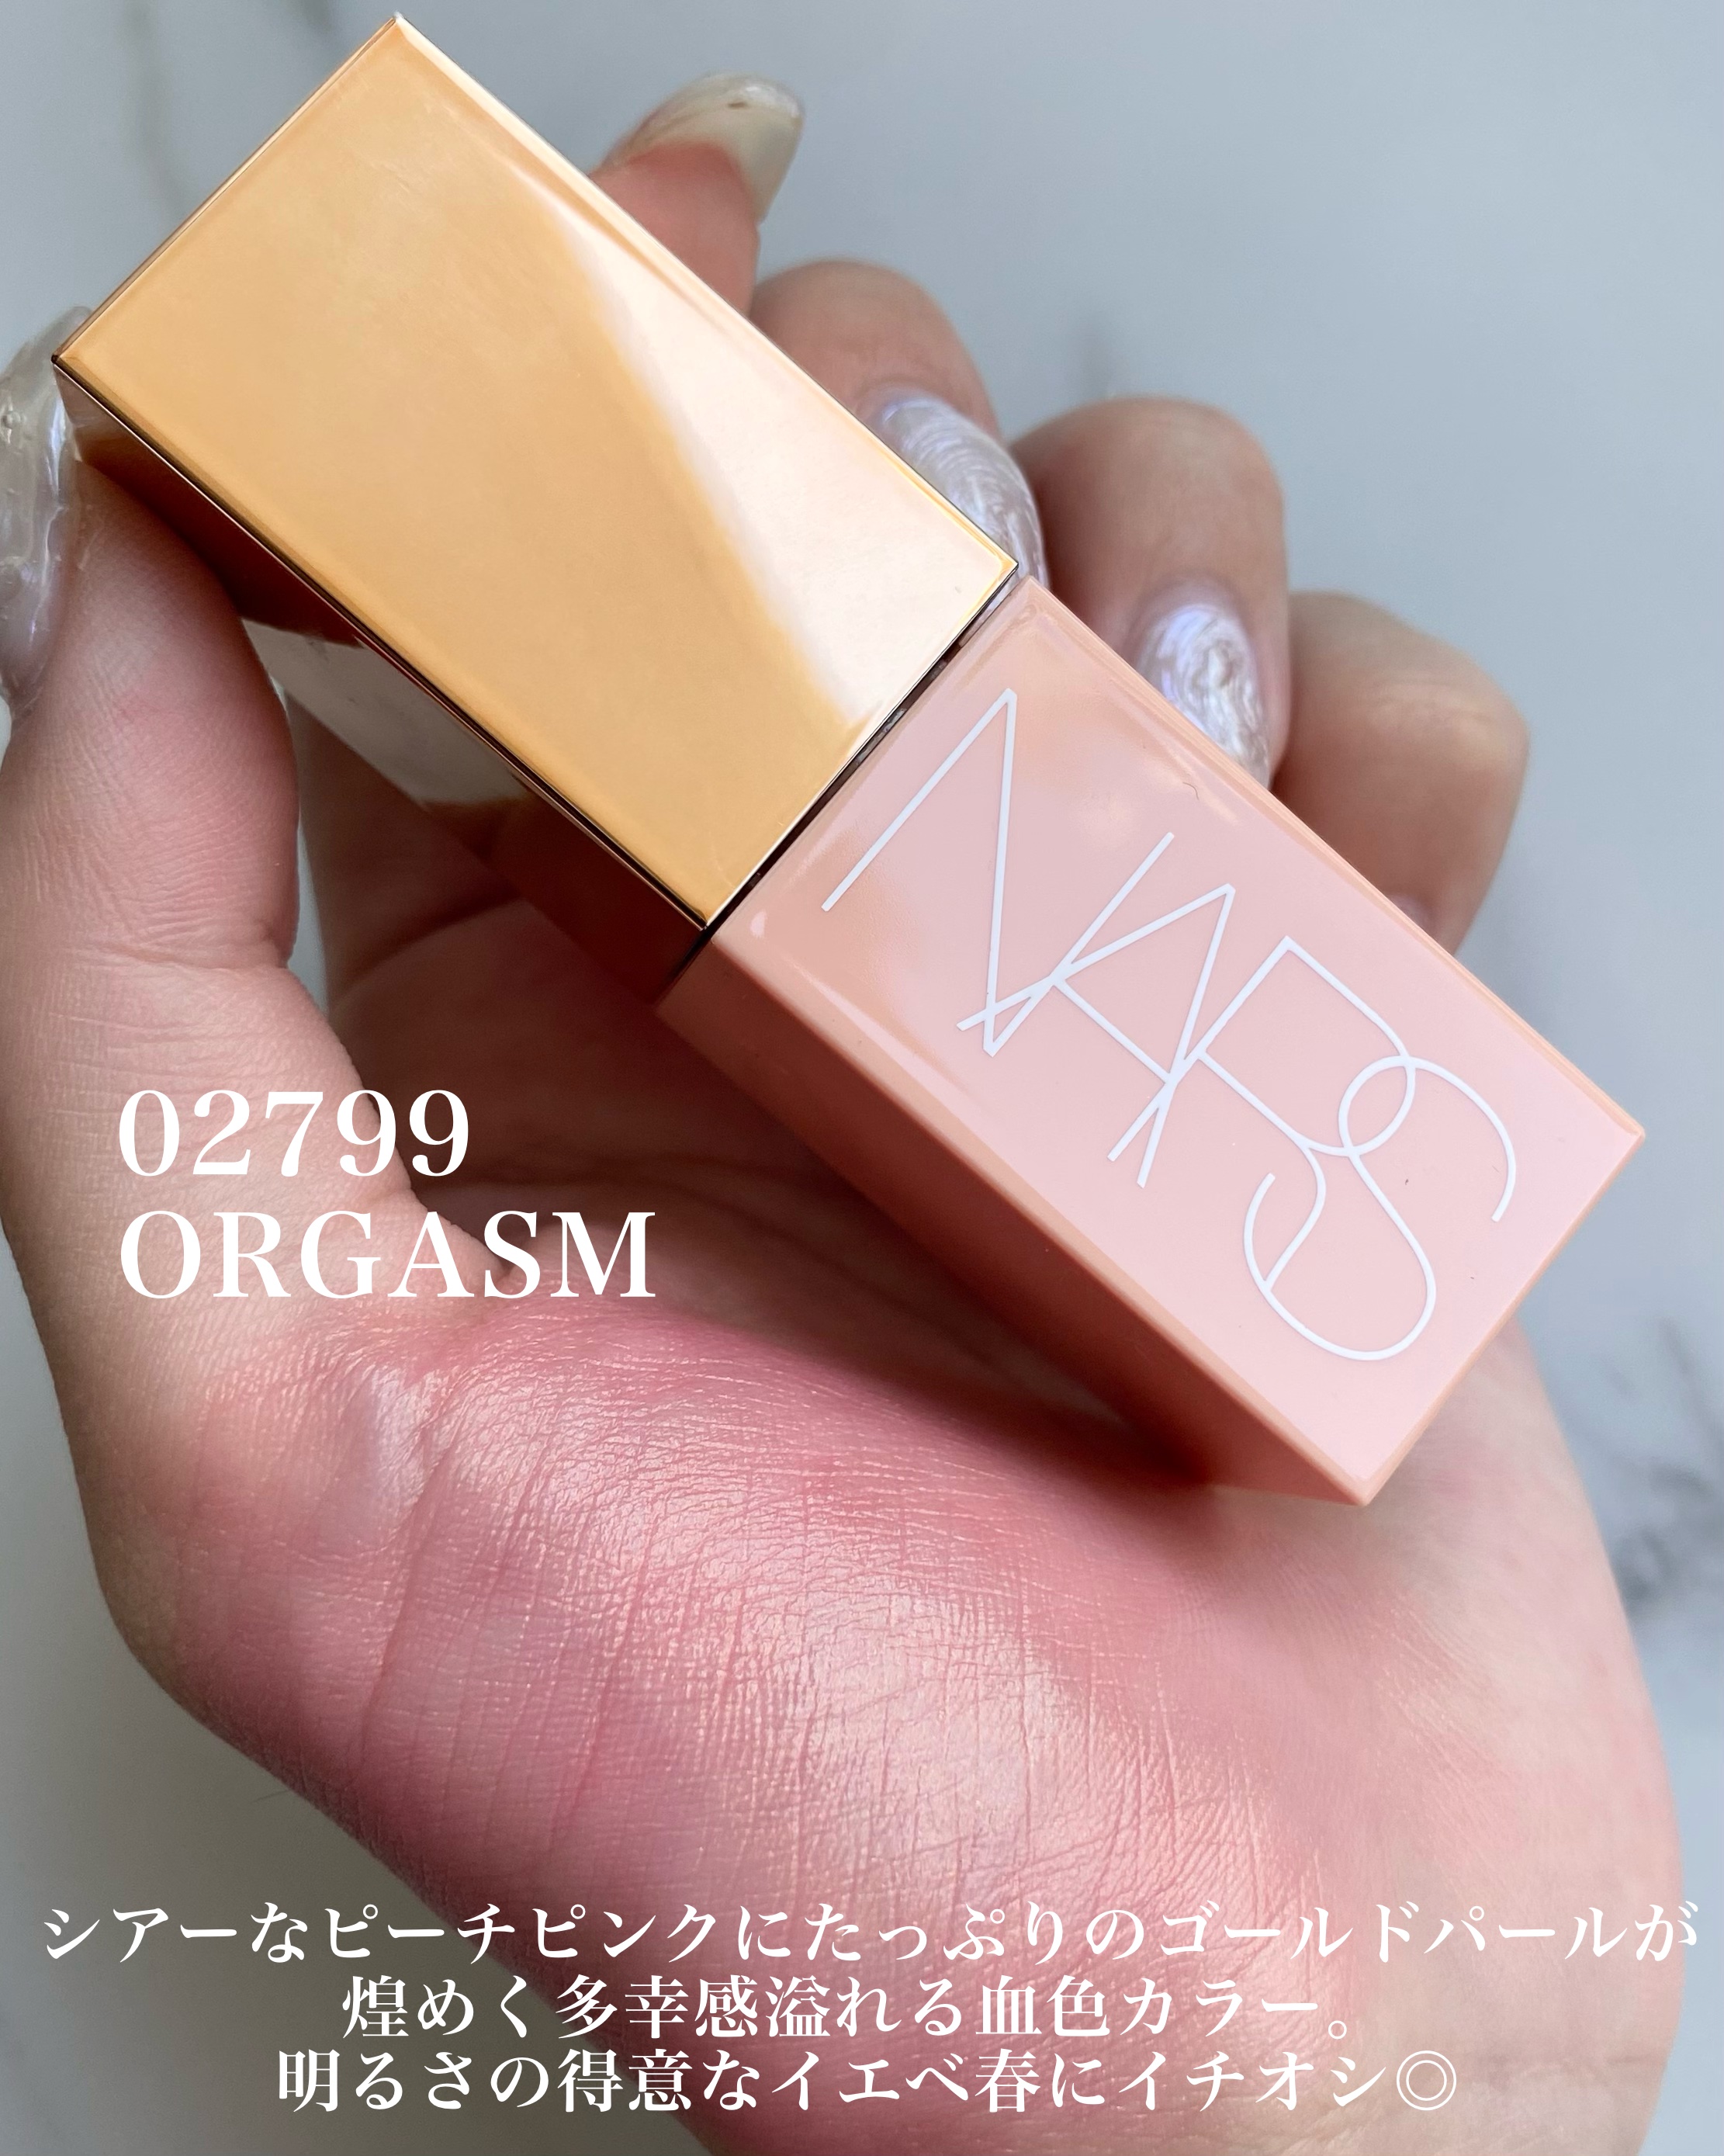 NARS アフターグロー リキッドブラッシュ 02800 BEHAVE